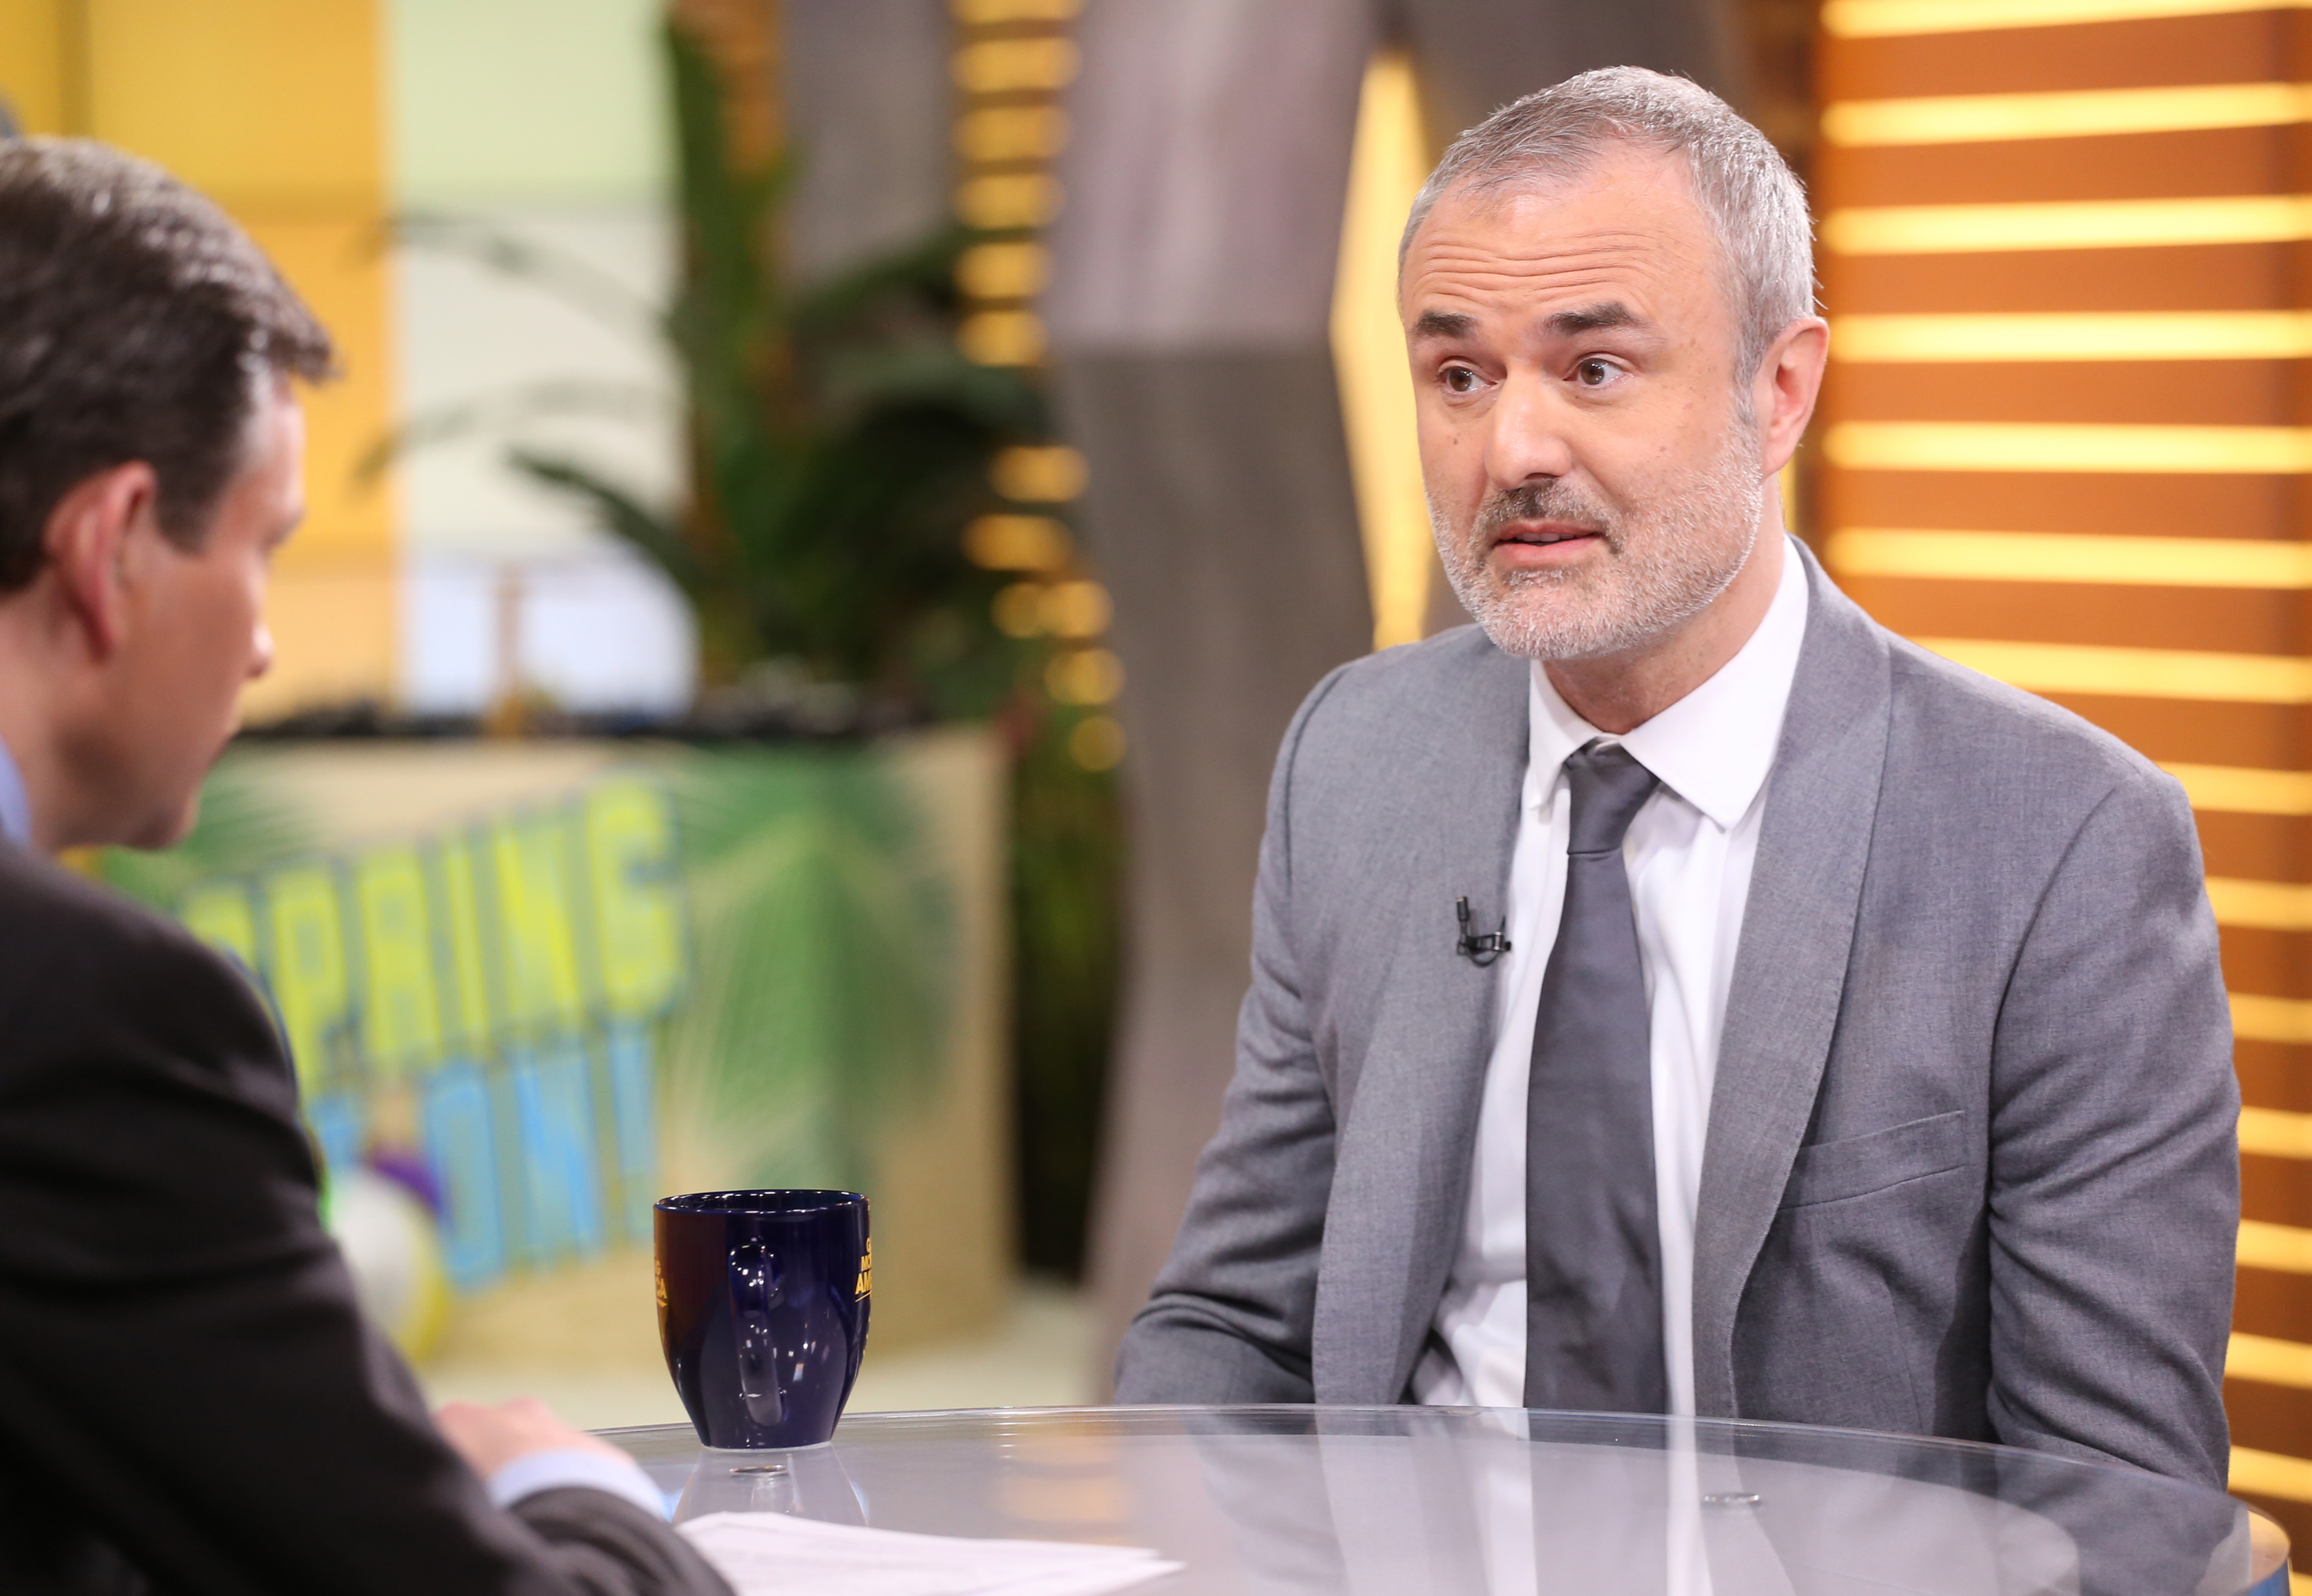 Nick Denton of Gawker is a guest on "Good Morning America" on March 24, 2016. (Fred Lee—ABC via Getty Images)